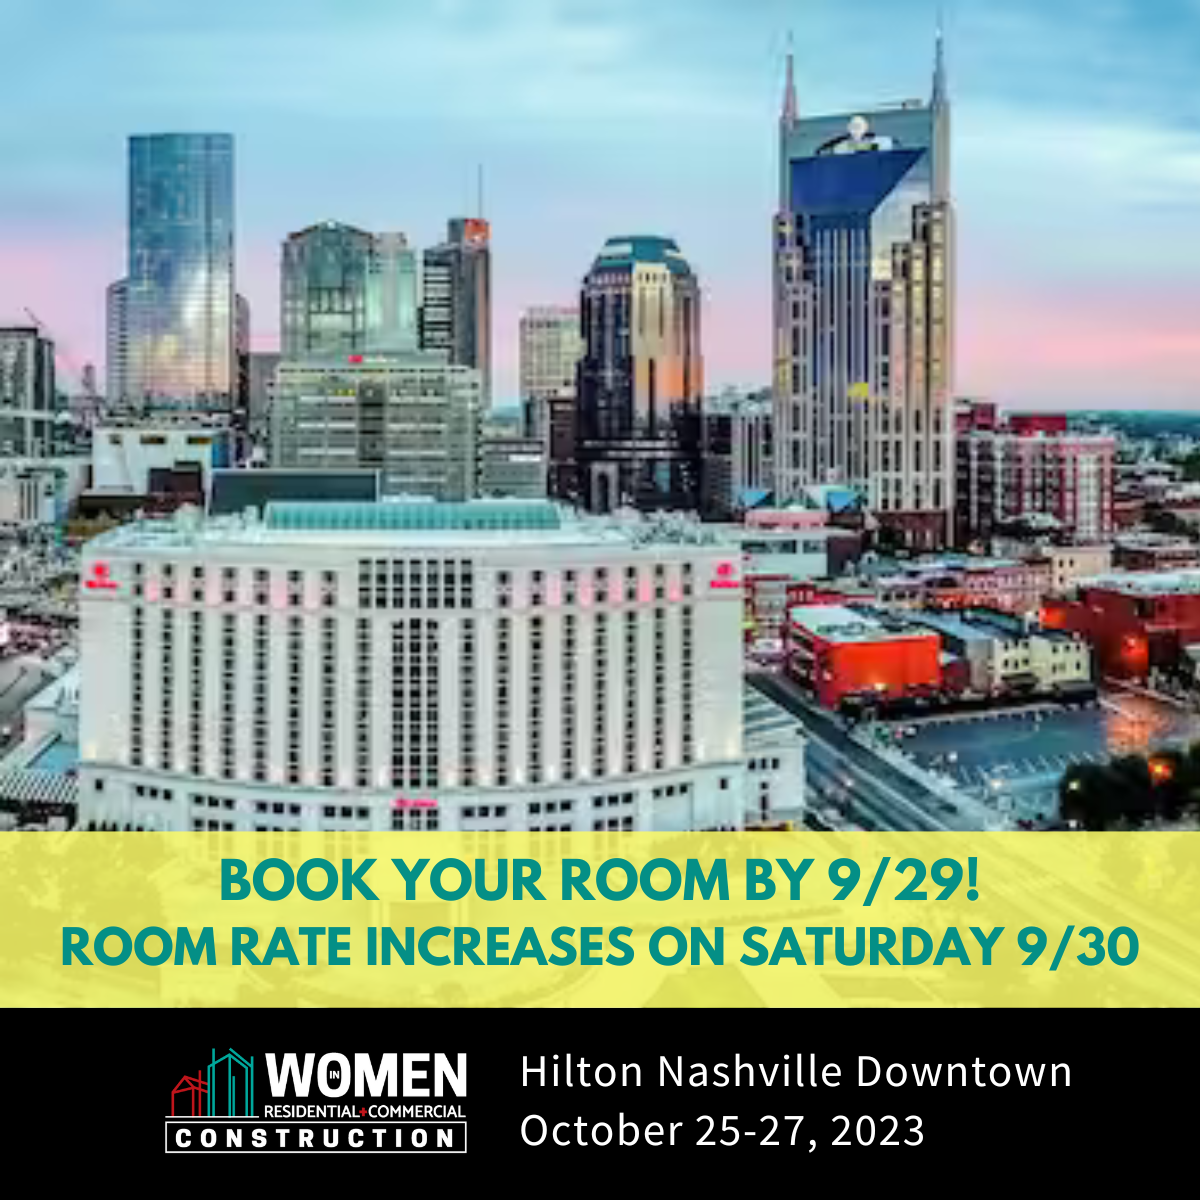 Last chance for discounted hotel rate! Reserve your spot today for Women in Residential+Commercial Construction, Oct. 25-27, Nashville 